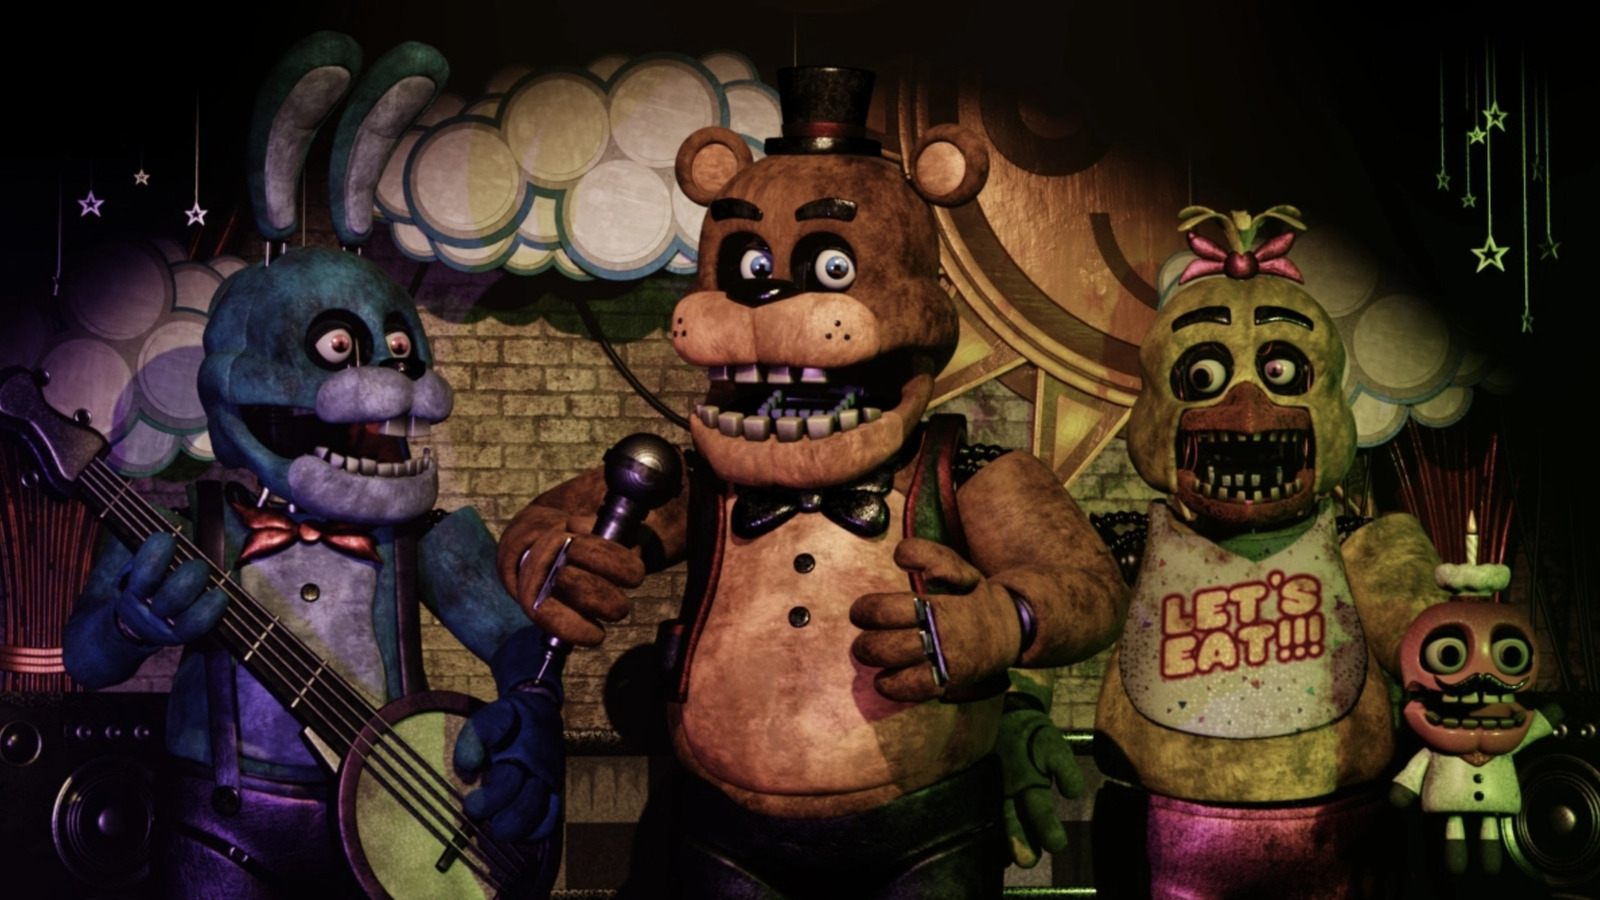 Five Nights At Freddy's Explained: The Story Behind One Of This Year's Biggest Horror Movies